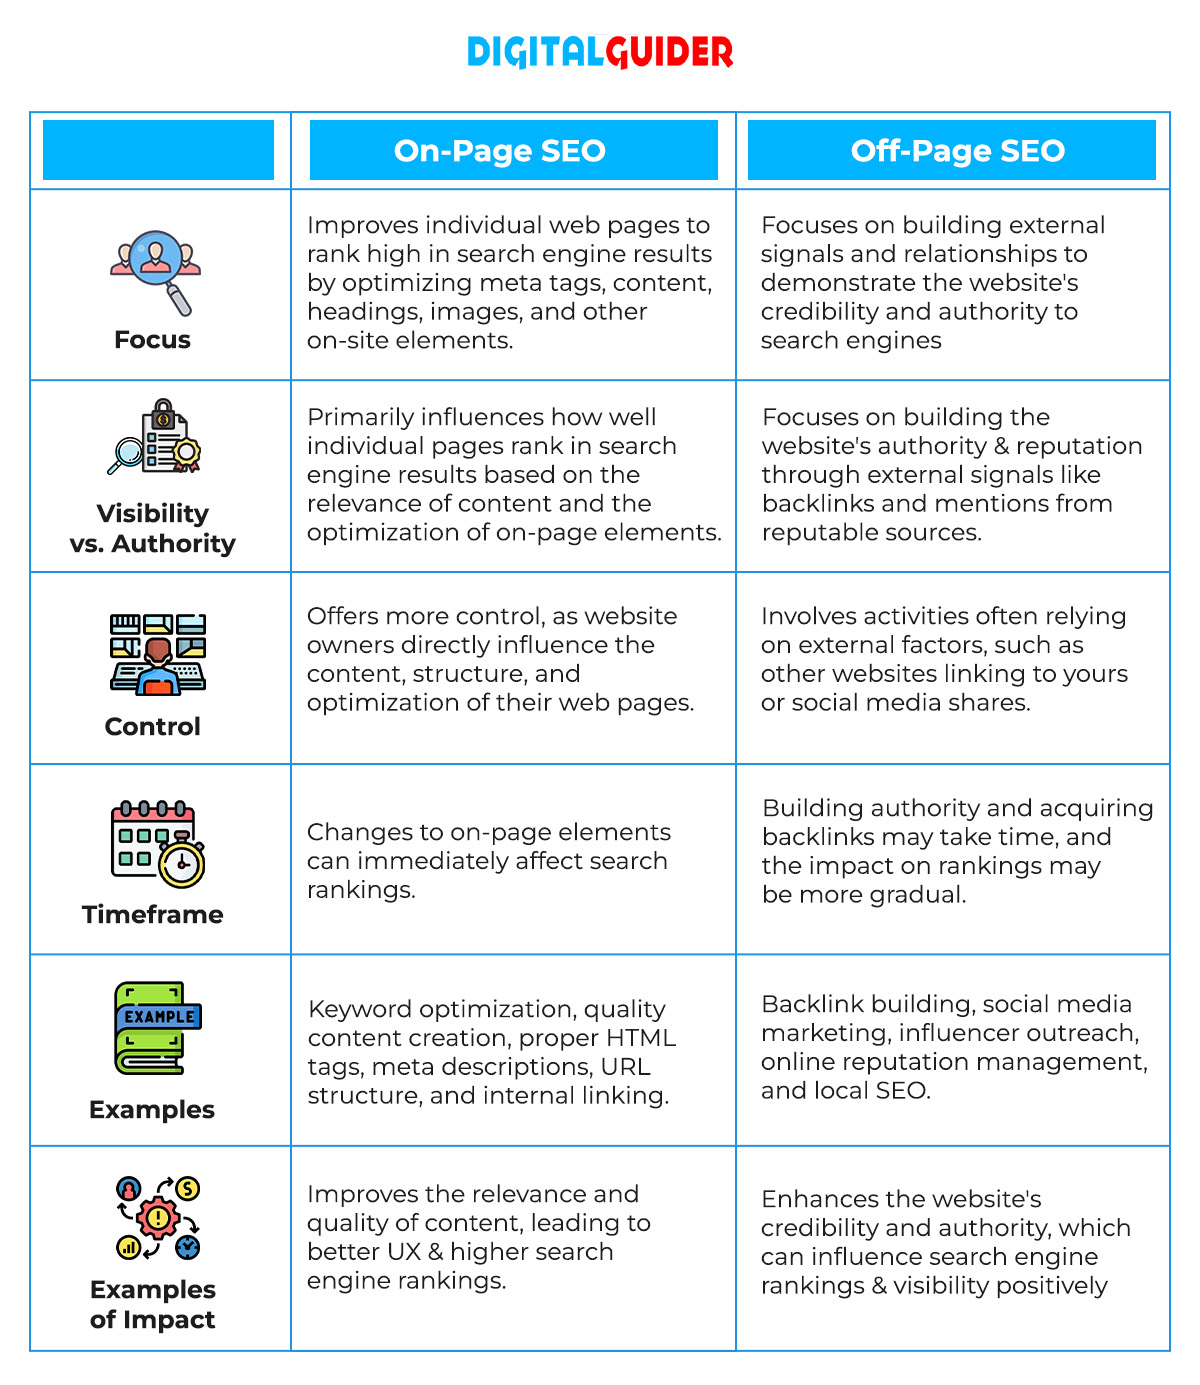 Differences on page off page SEO